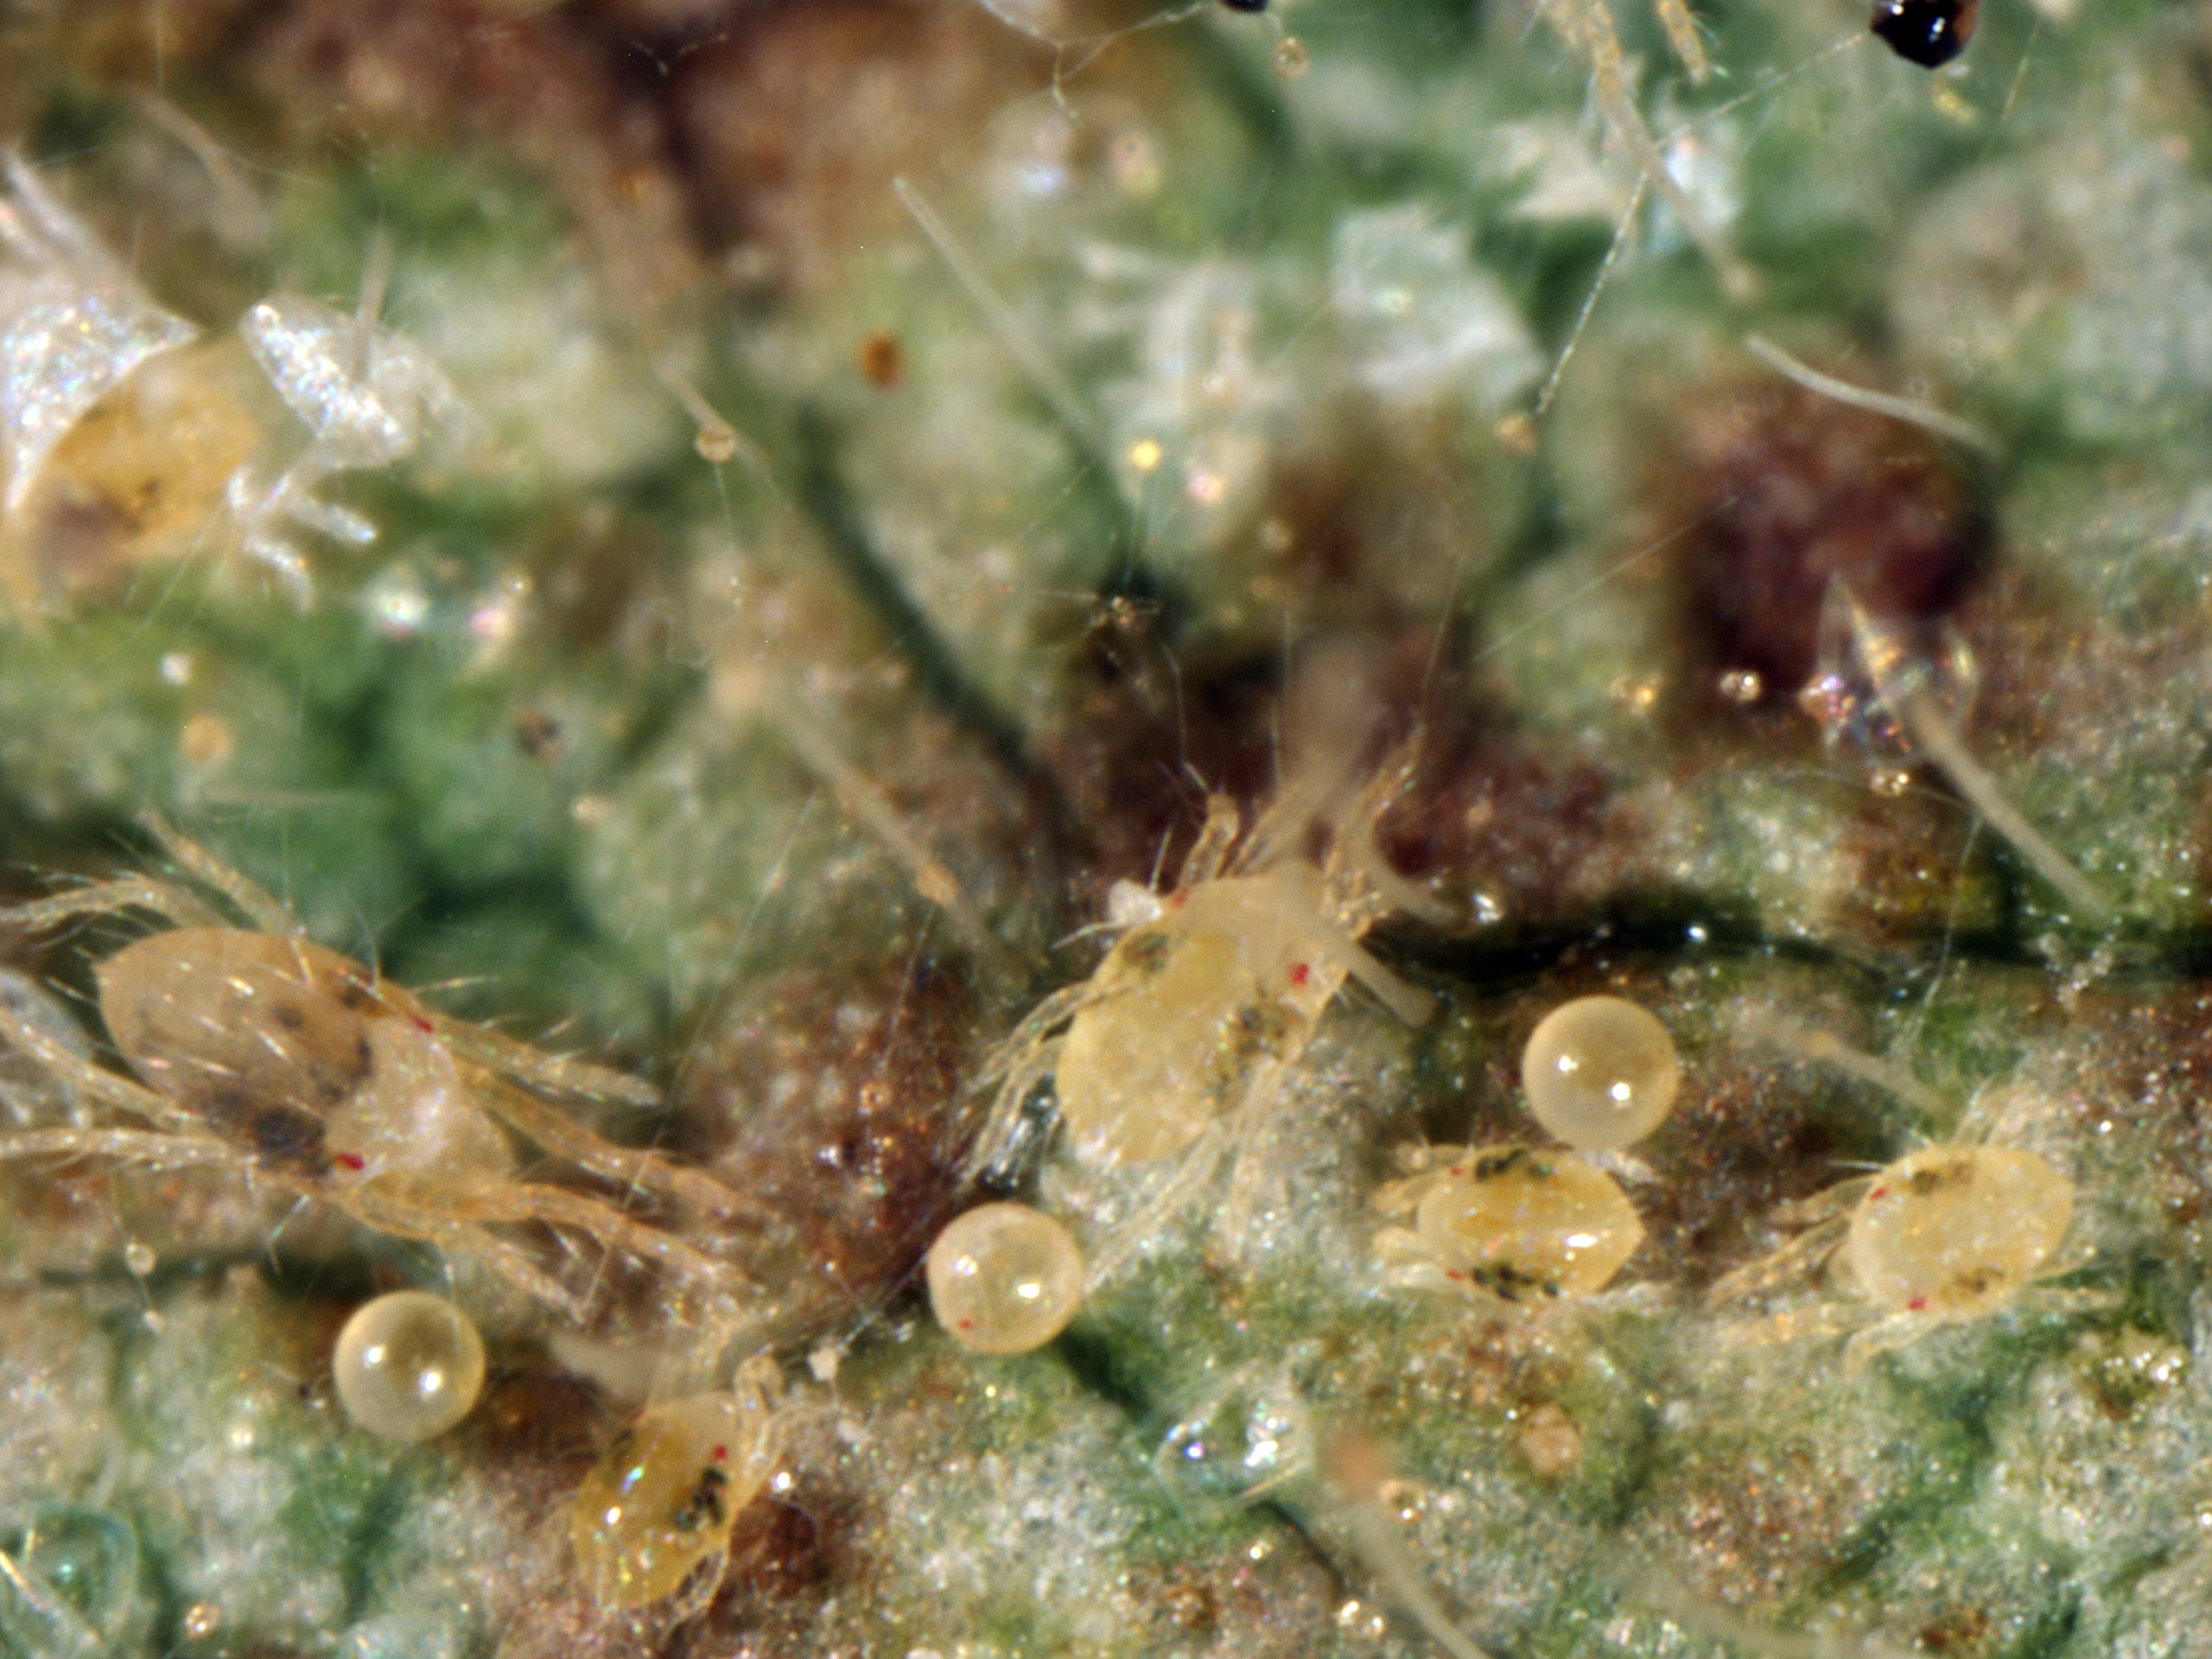 Twospotted spider mites, adults, nymphs, and eggs